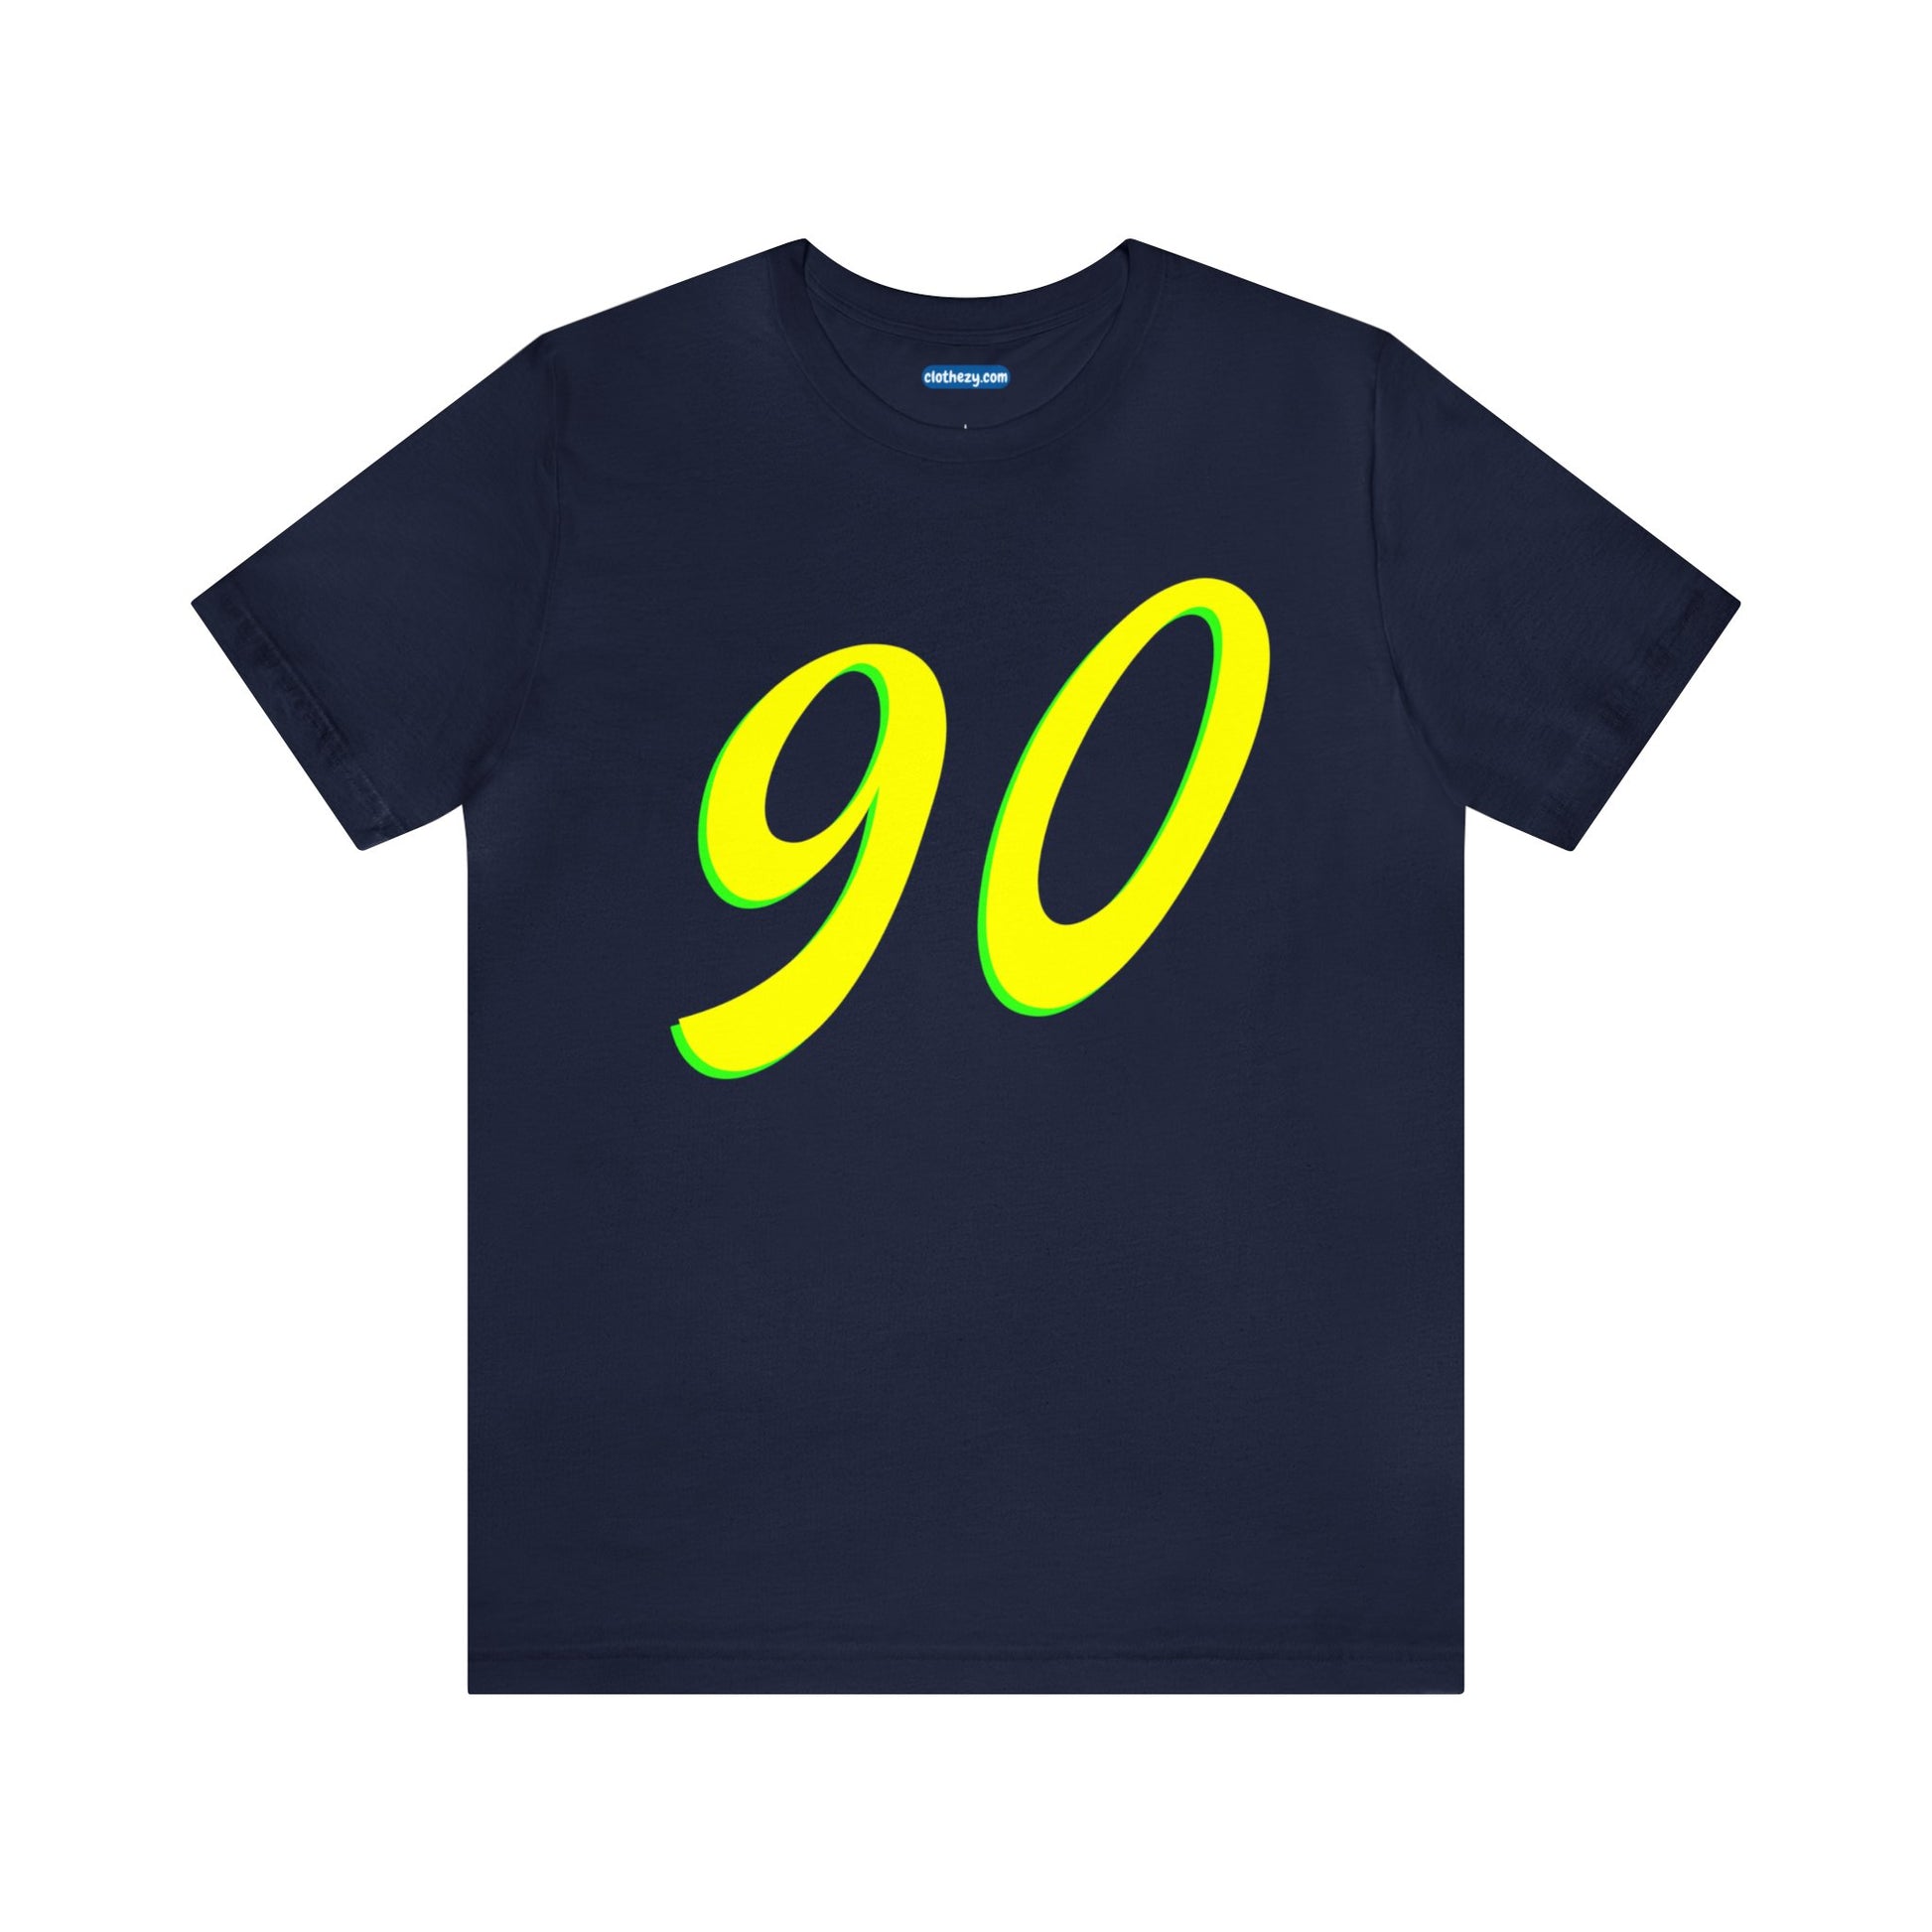 Number 90 Design - Soft Cotton Tee for birthdays and celebrations, Gift for friends and family, Multiple Options by clothezy.com in Orange Size Small - Buy Now